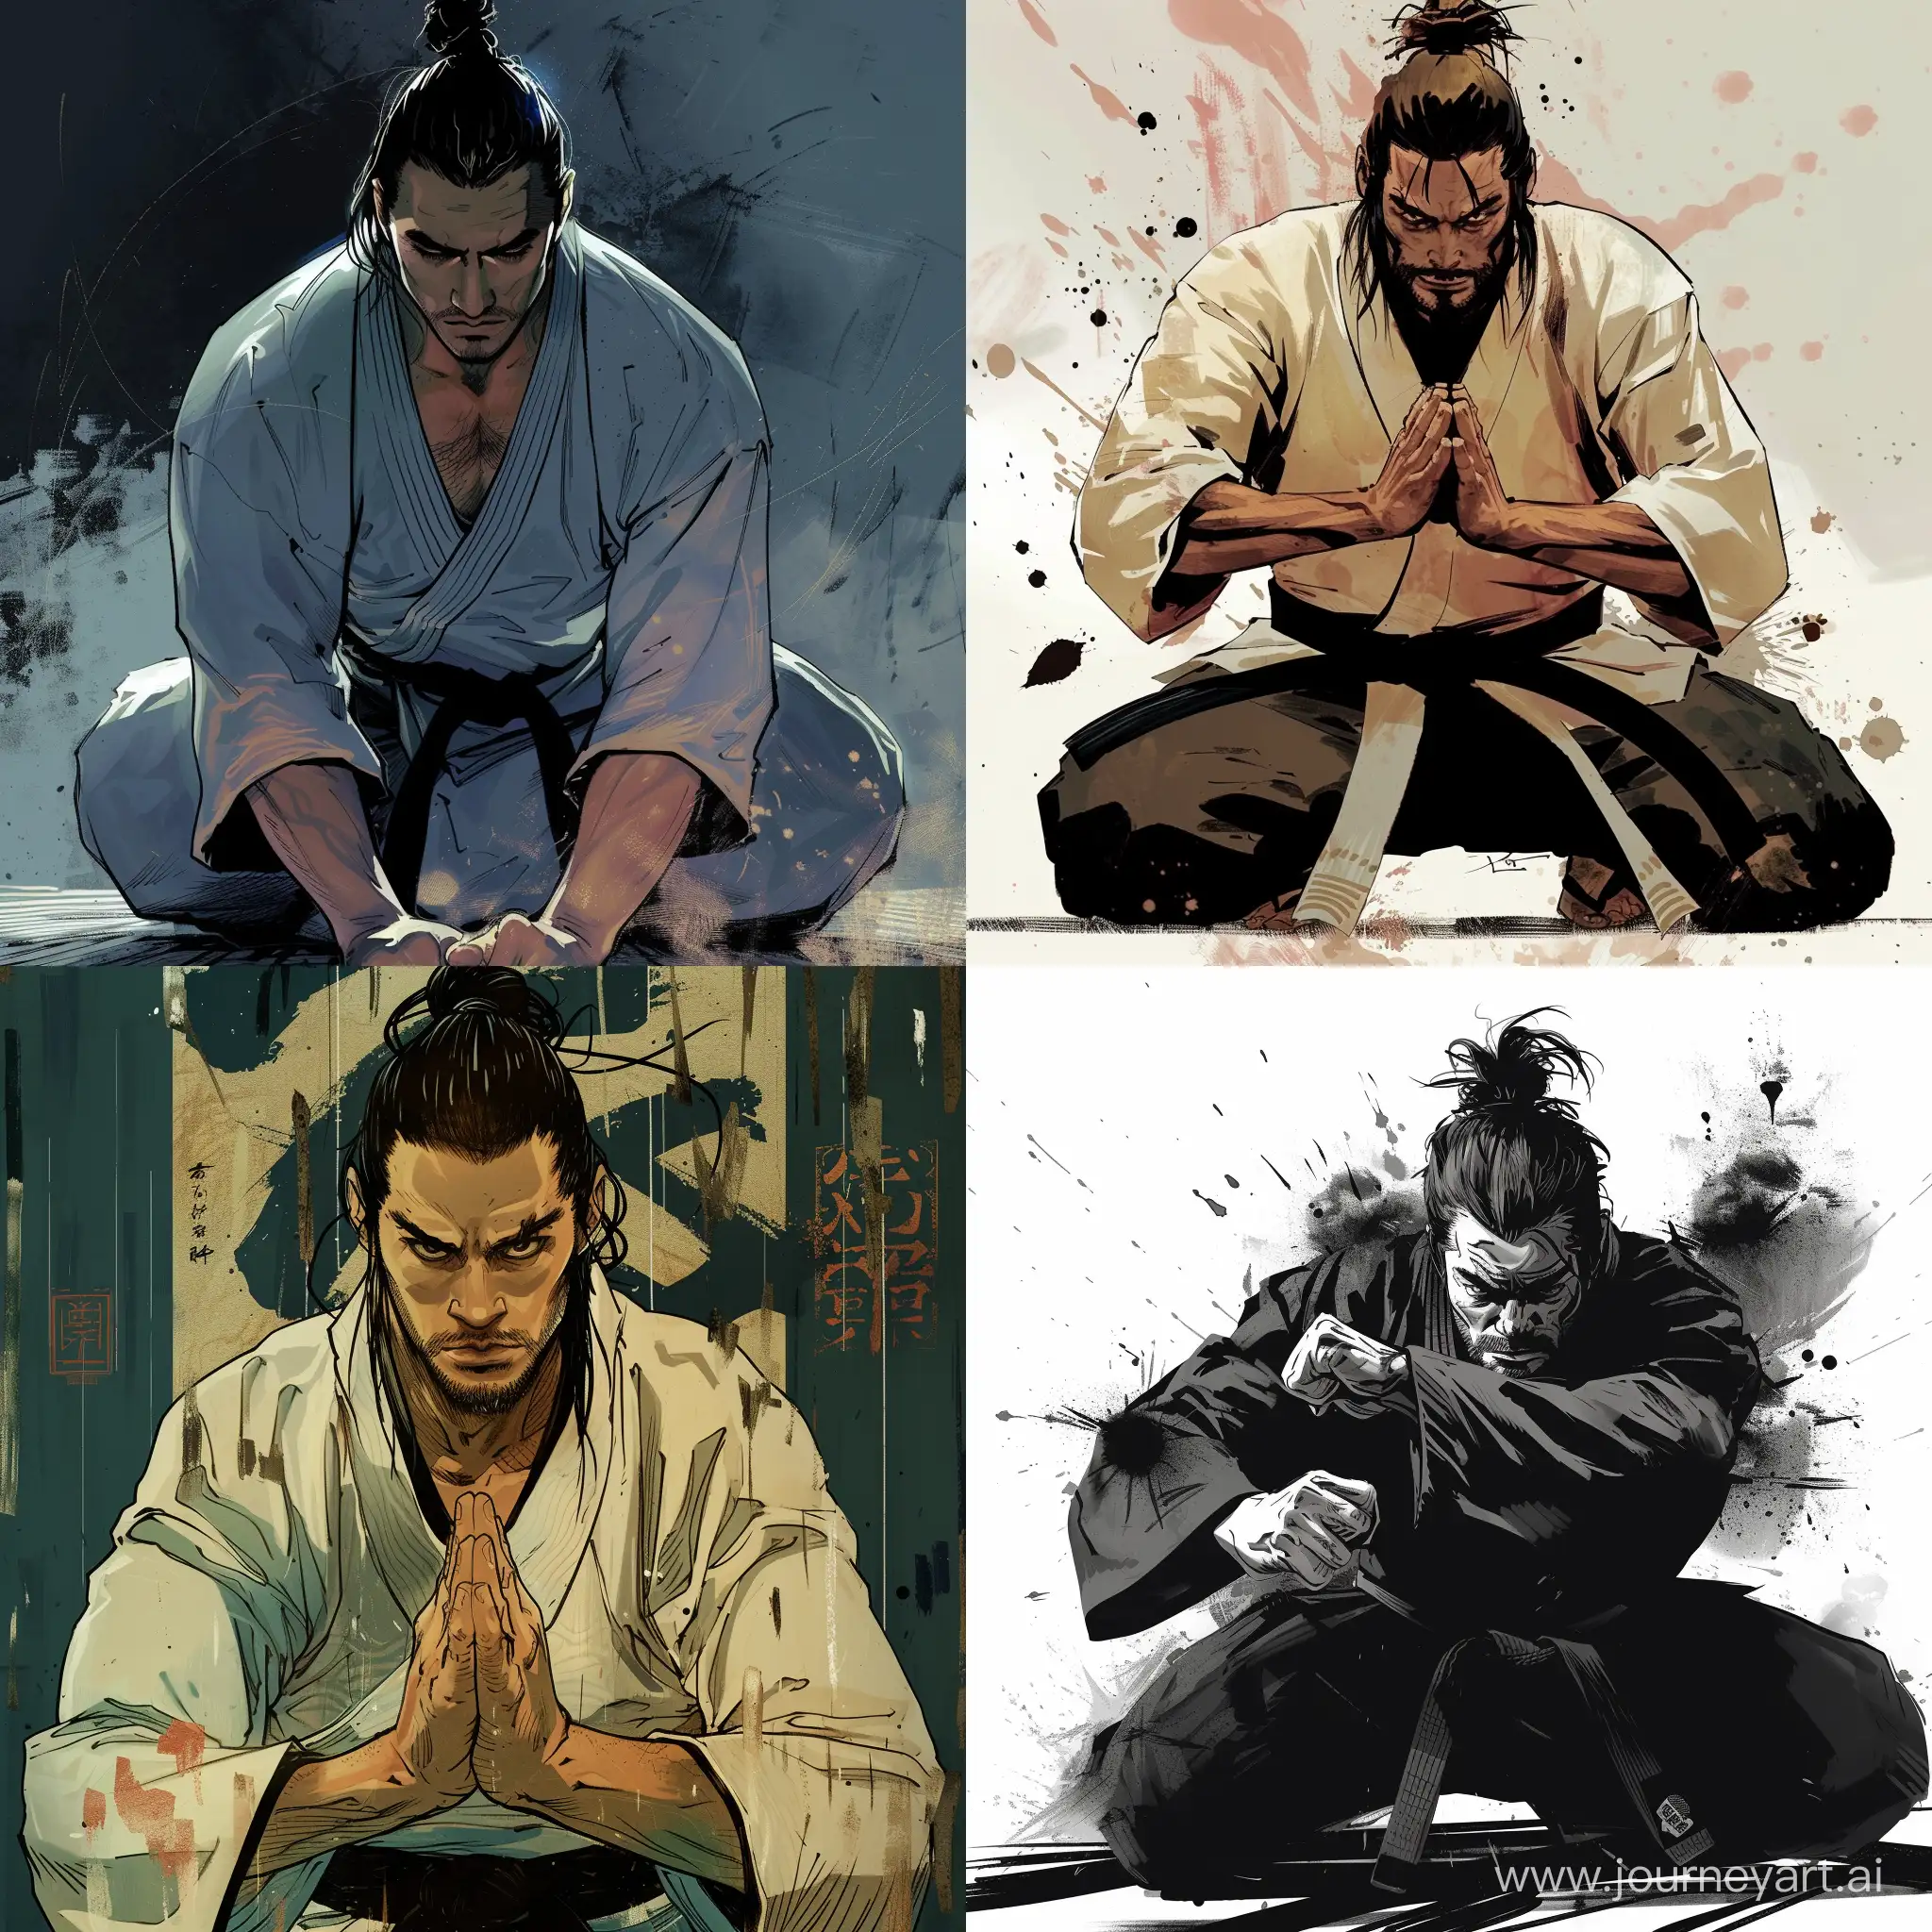 a samurai with a cool gaze solemnly bowing to do karate in dynamic pose, graphic novel